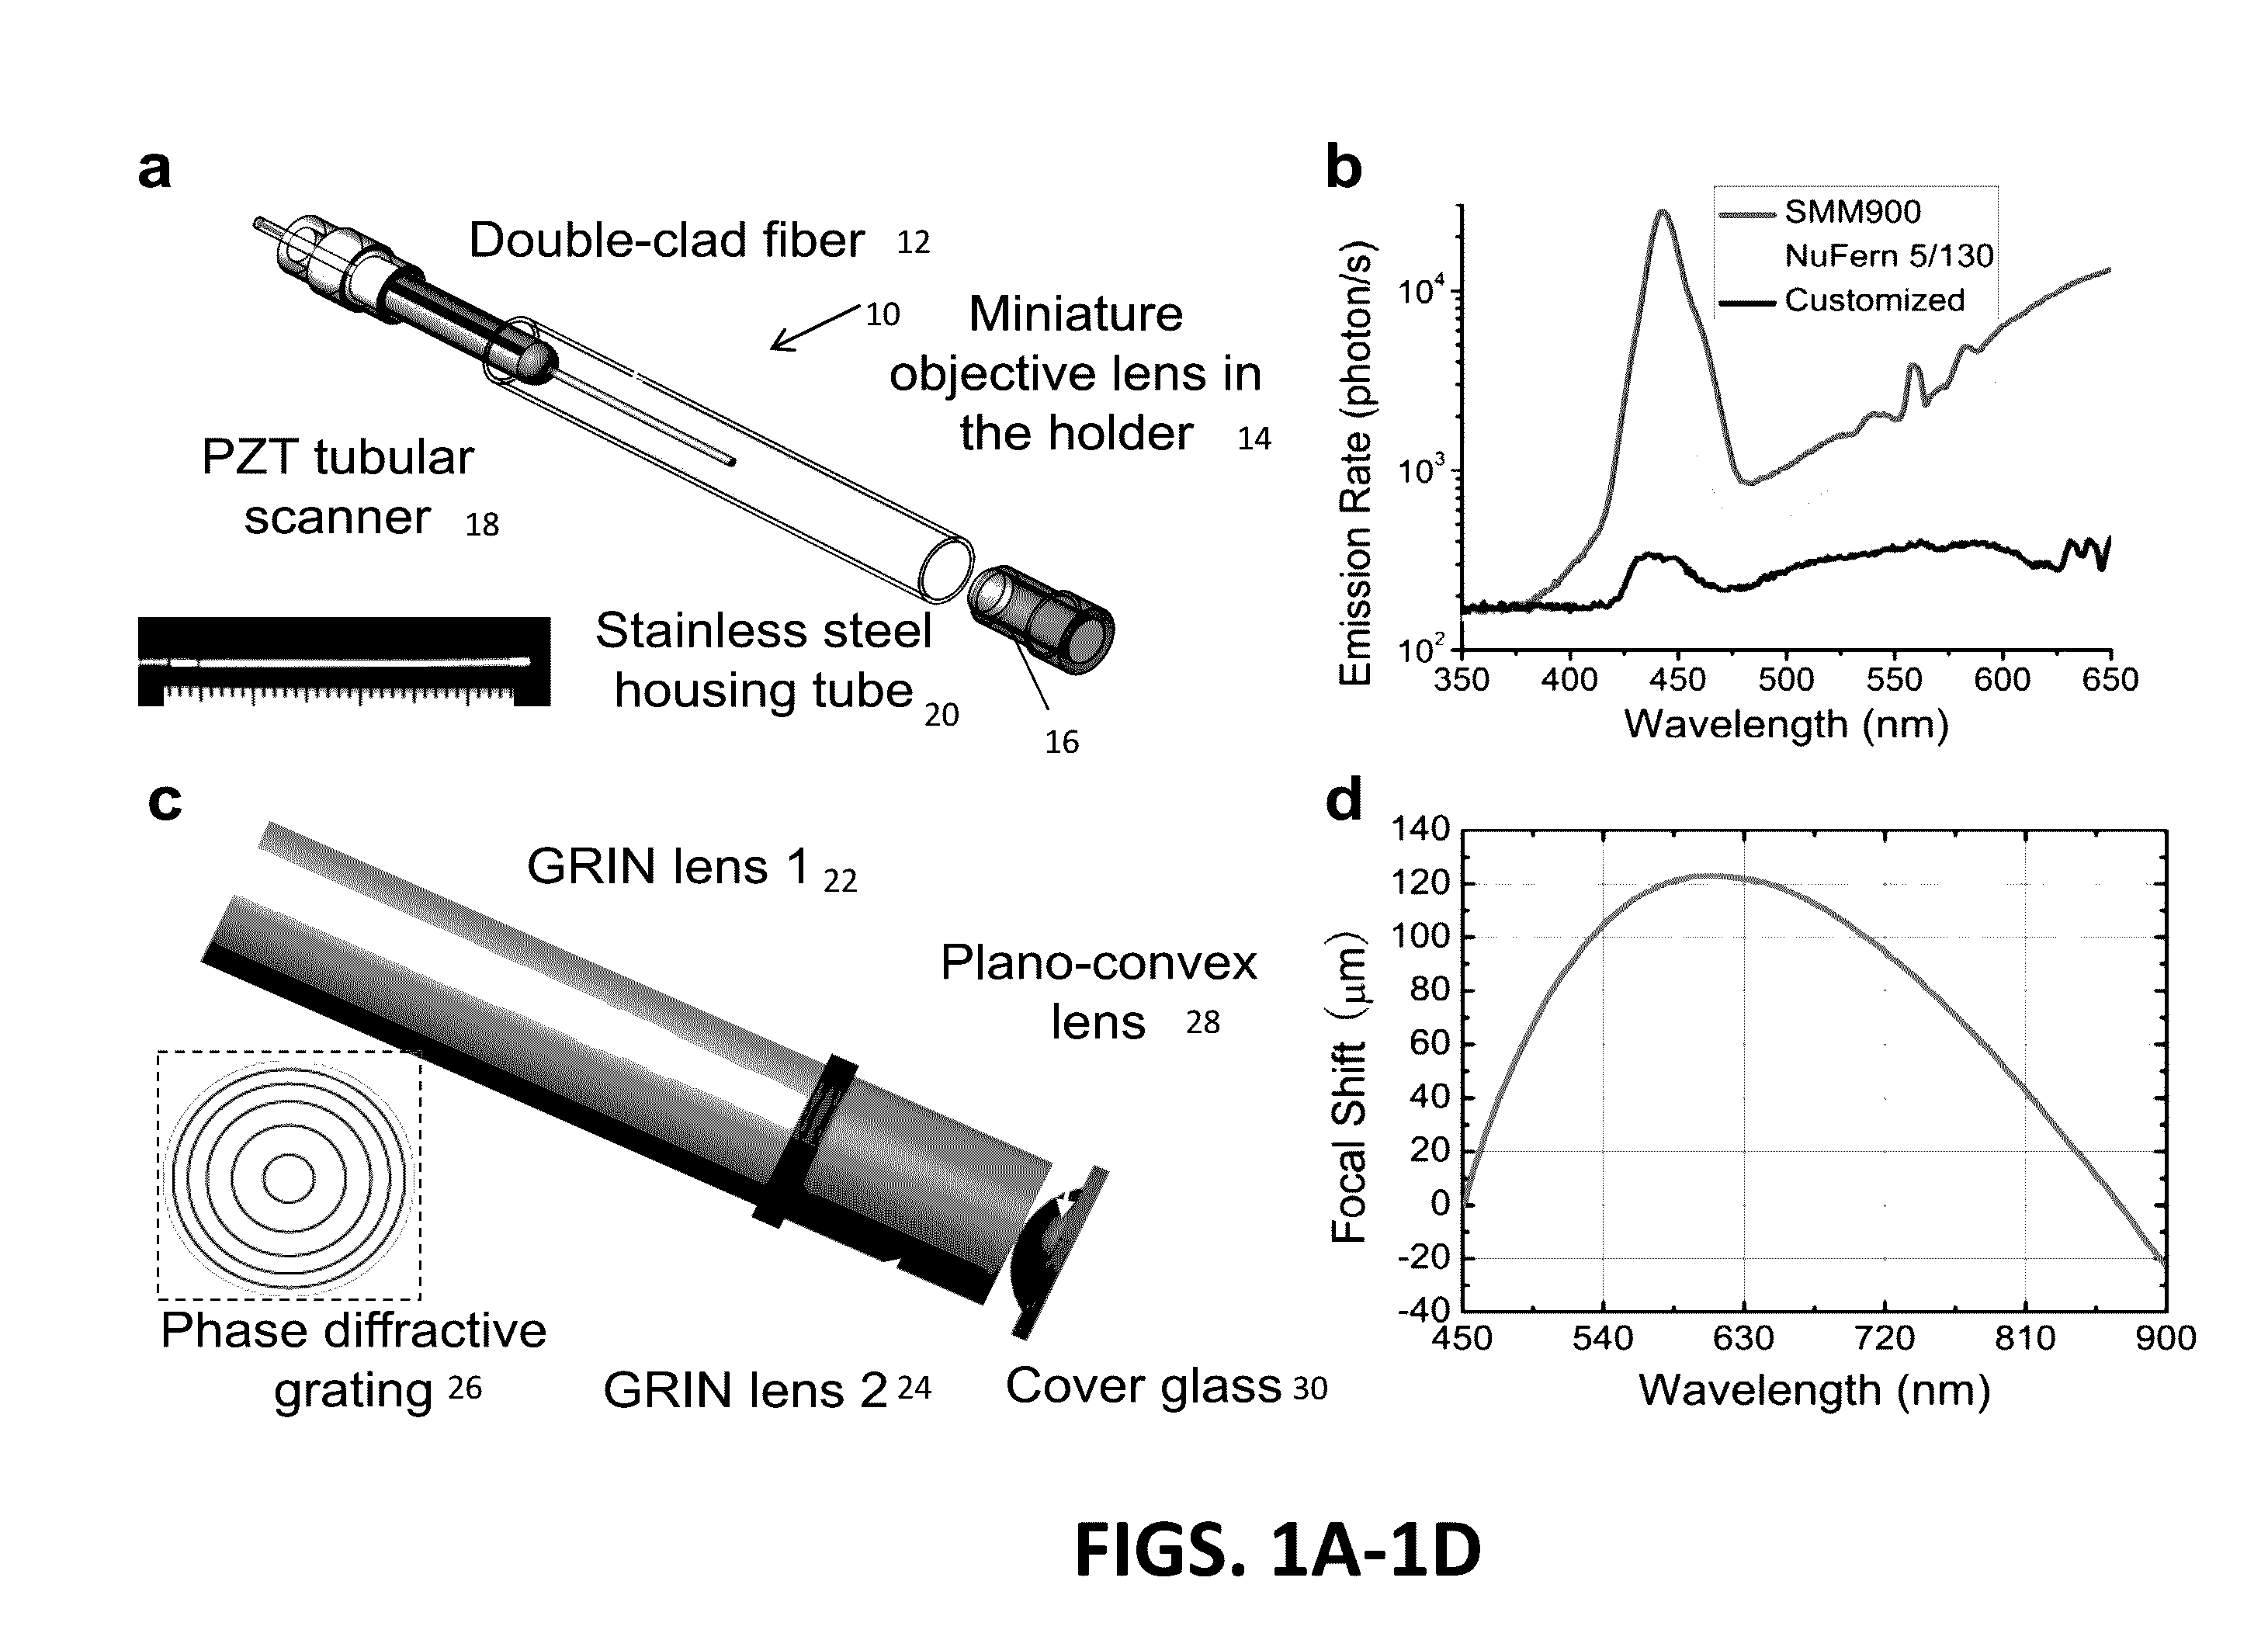 Fiber-optic methods and devices enabling multiphoton imaging with improved signal-to-noise ratio